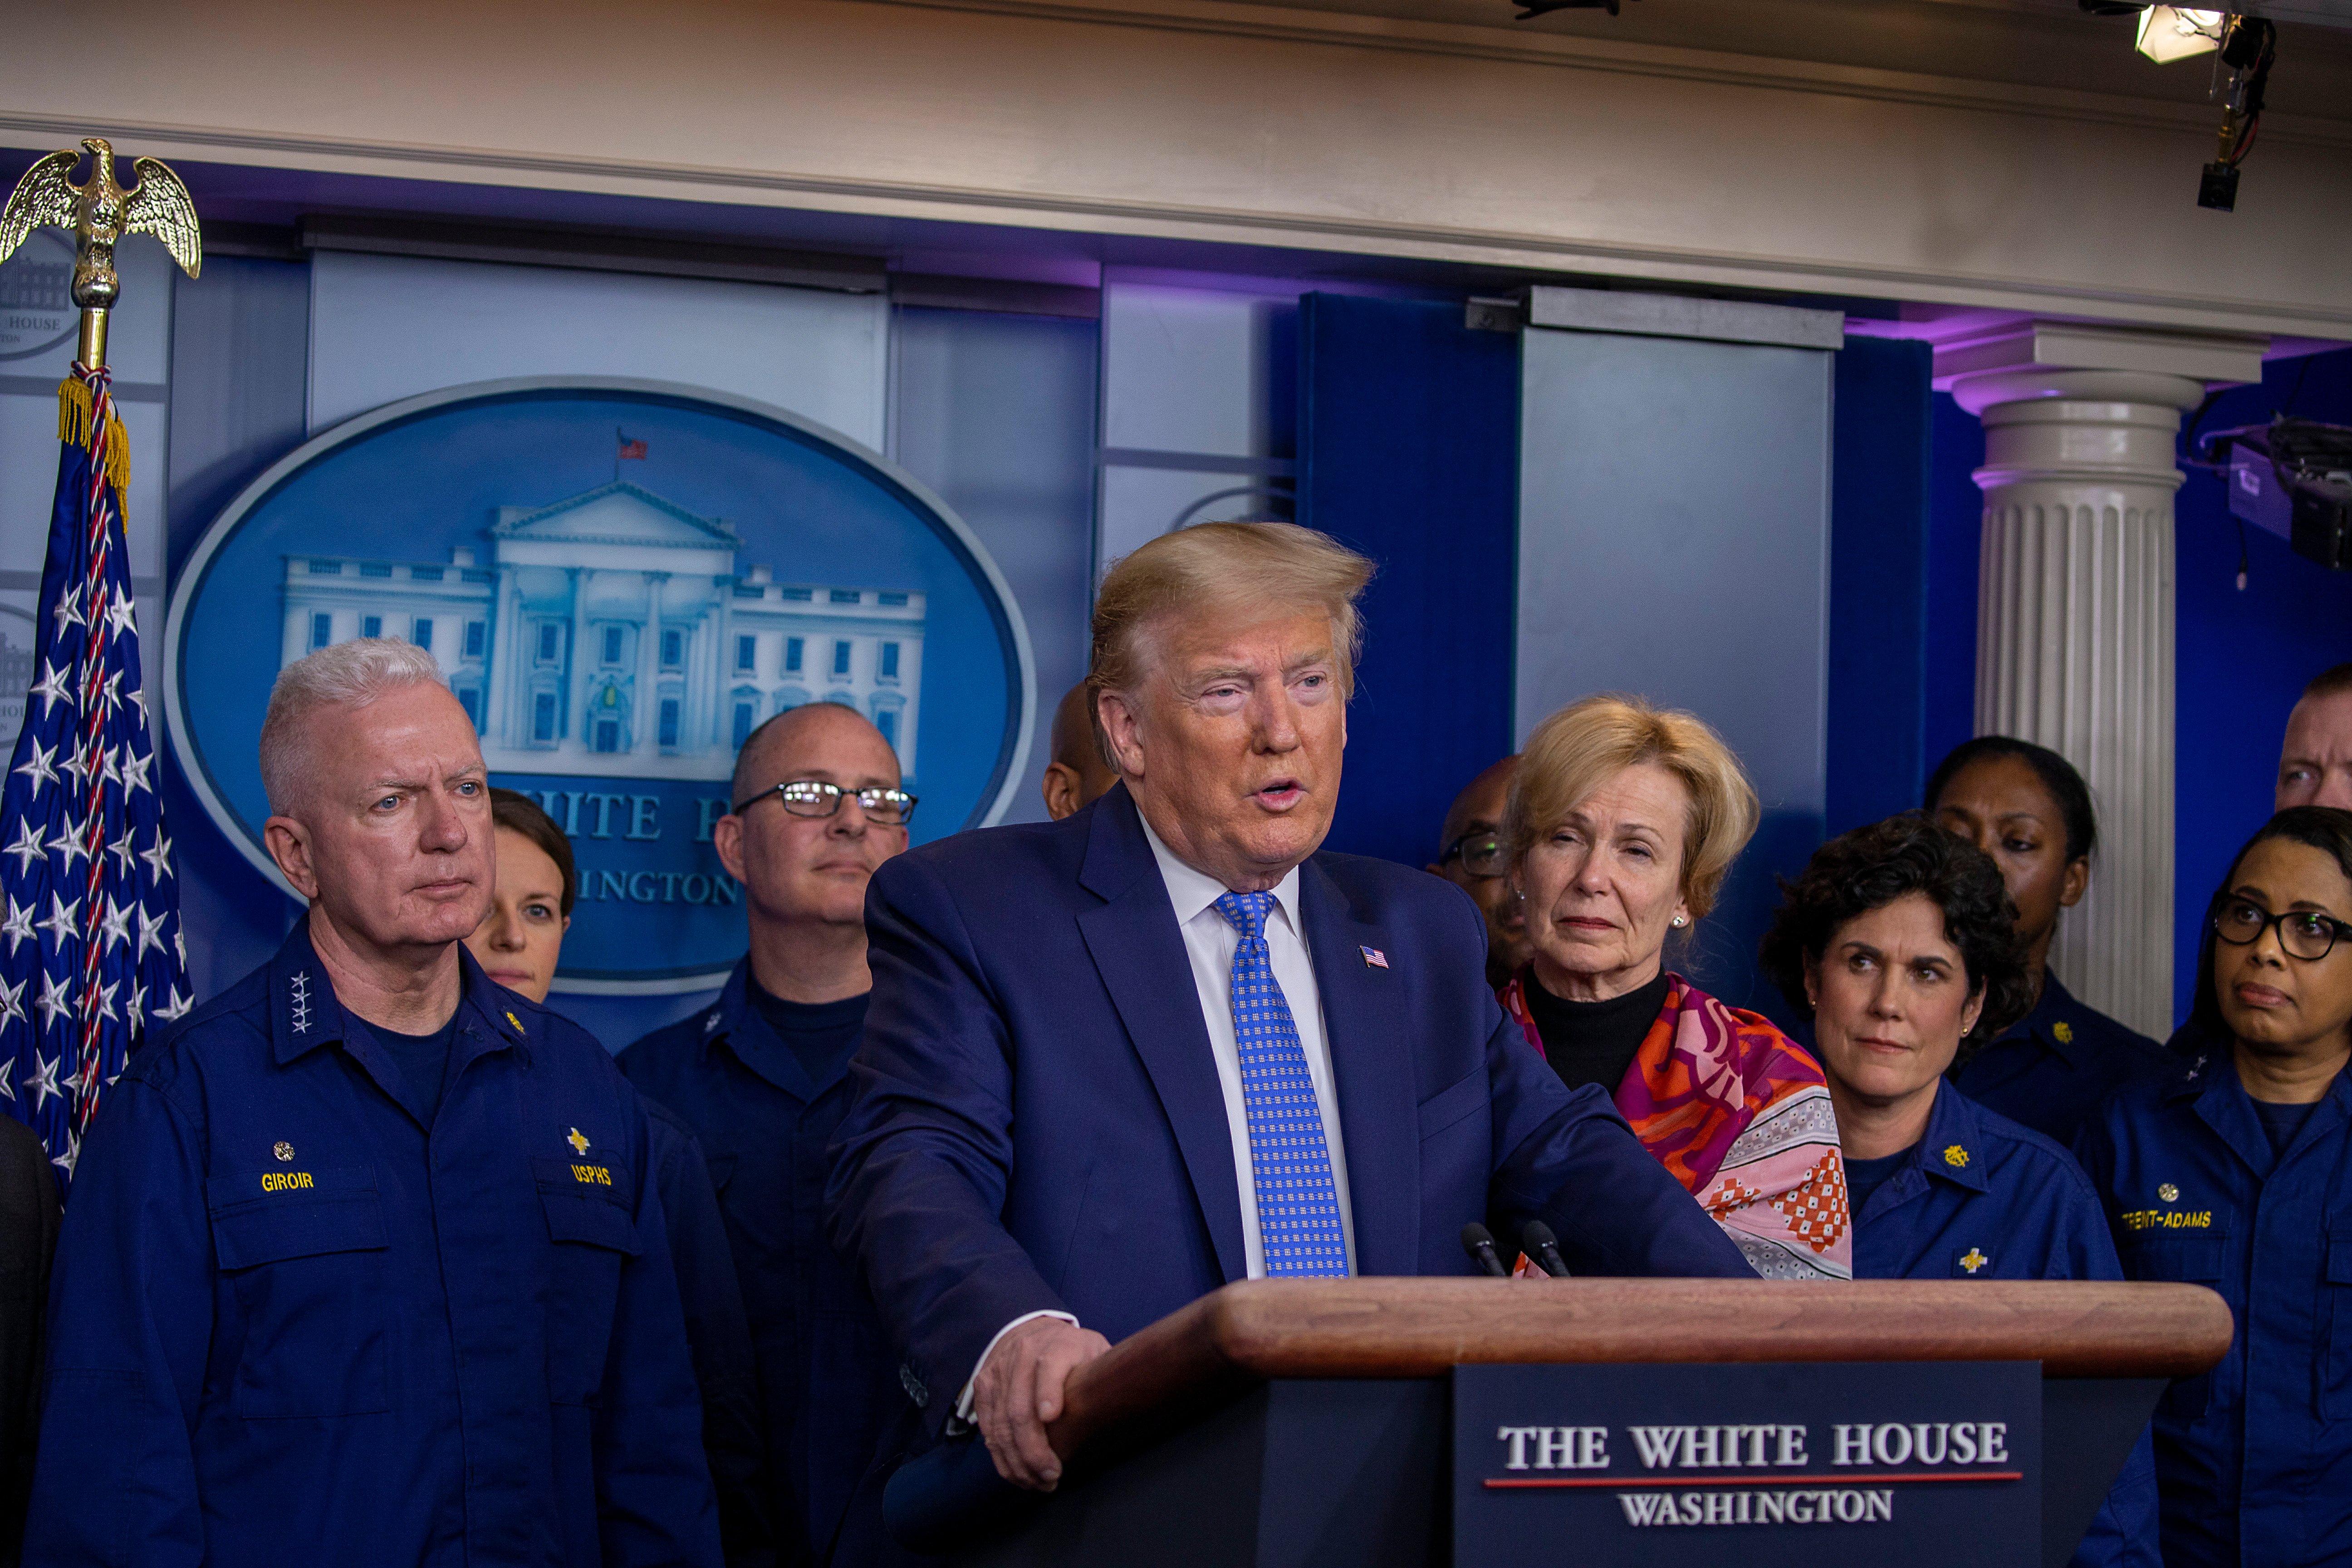 WASHINGTON, DC - MARCH 15: U.S. President Donald Trump speaks to the media in the press briefing room at the White House on March 15, 2020 in Washington, DC. The United States has surpassed 3,000 confirmed cases of the coronavirus, and the death toll climbed to at least 61, with 25 of the deaths associated with the Life Care Center in Kirkland, Washington. (Photo by Tasos Katopodis/Getty Images)